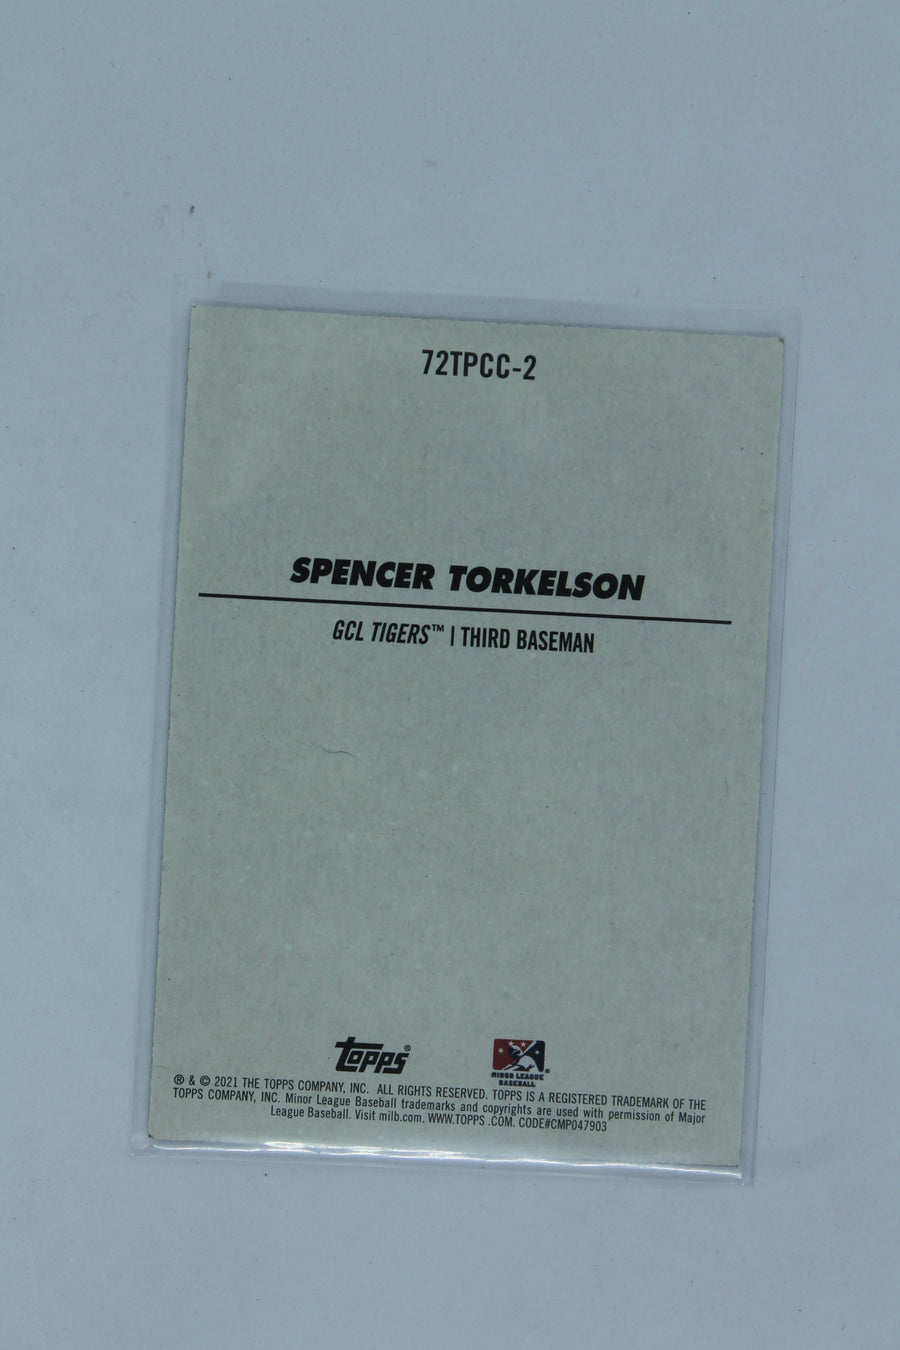 Spencer Torkelson 2021 Topps Heritage Minor League Edition - 1972 Topps Pack Cover Cards #72TPCC-2   PRC